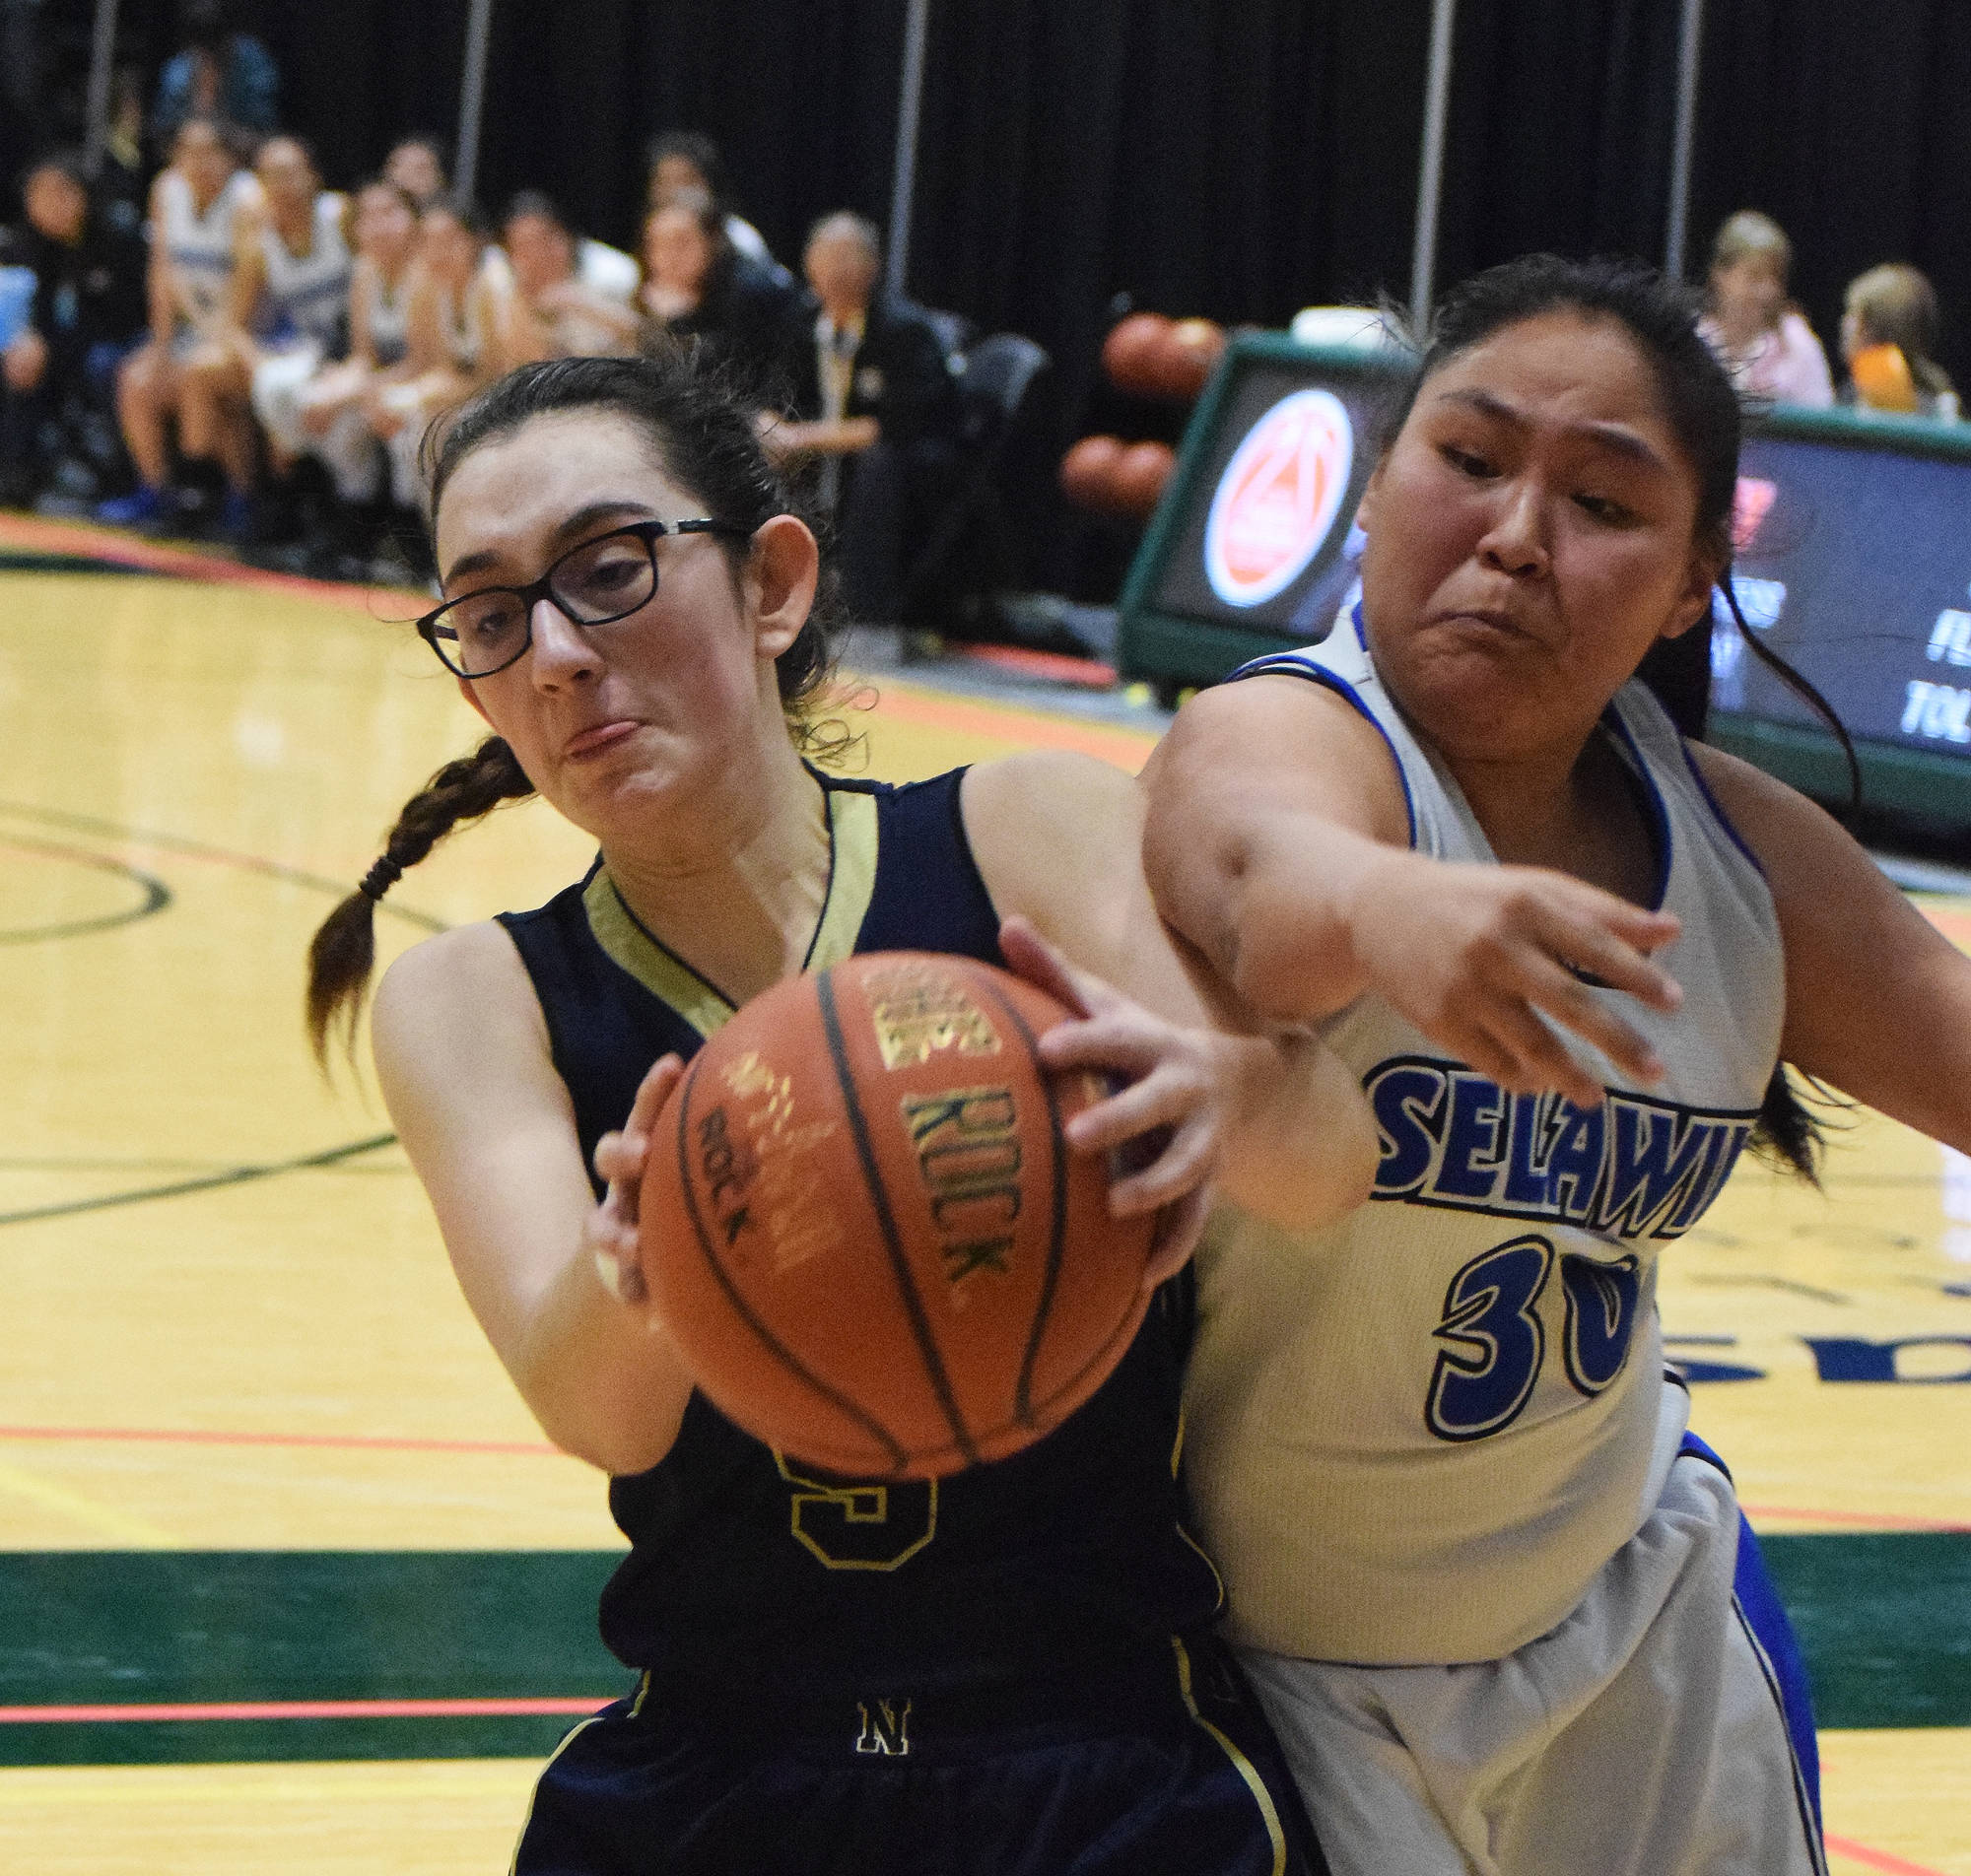 Ninilchik’s Olivia Delgado keeps the ball away from Selawik’s Kali Howarth Wednesday in an opening round contest at the Class 1A state basketball tournament at the Alaska Airlines Center in Anchorage. (Photo by Joey Klecka/Peninsula Clarion)